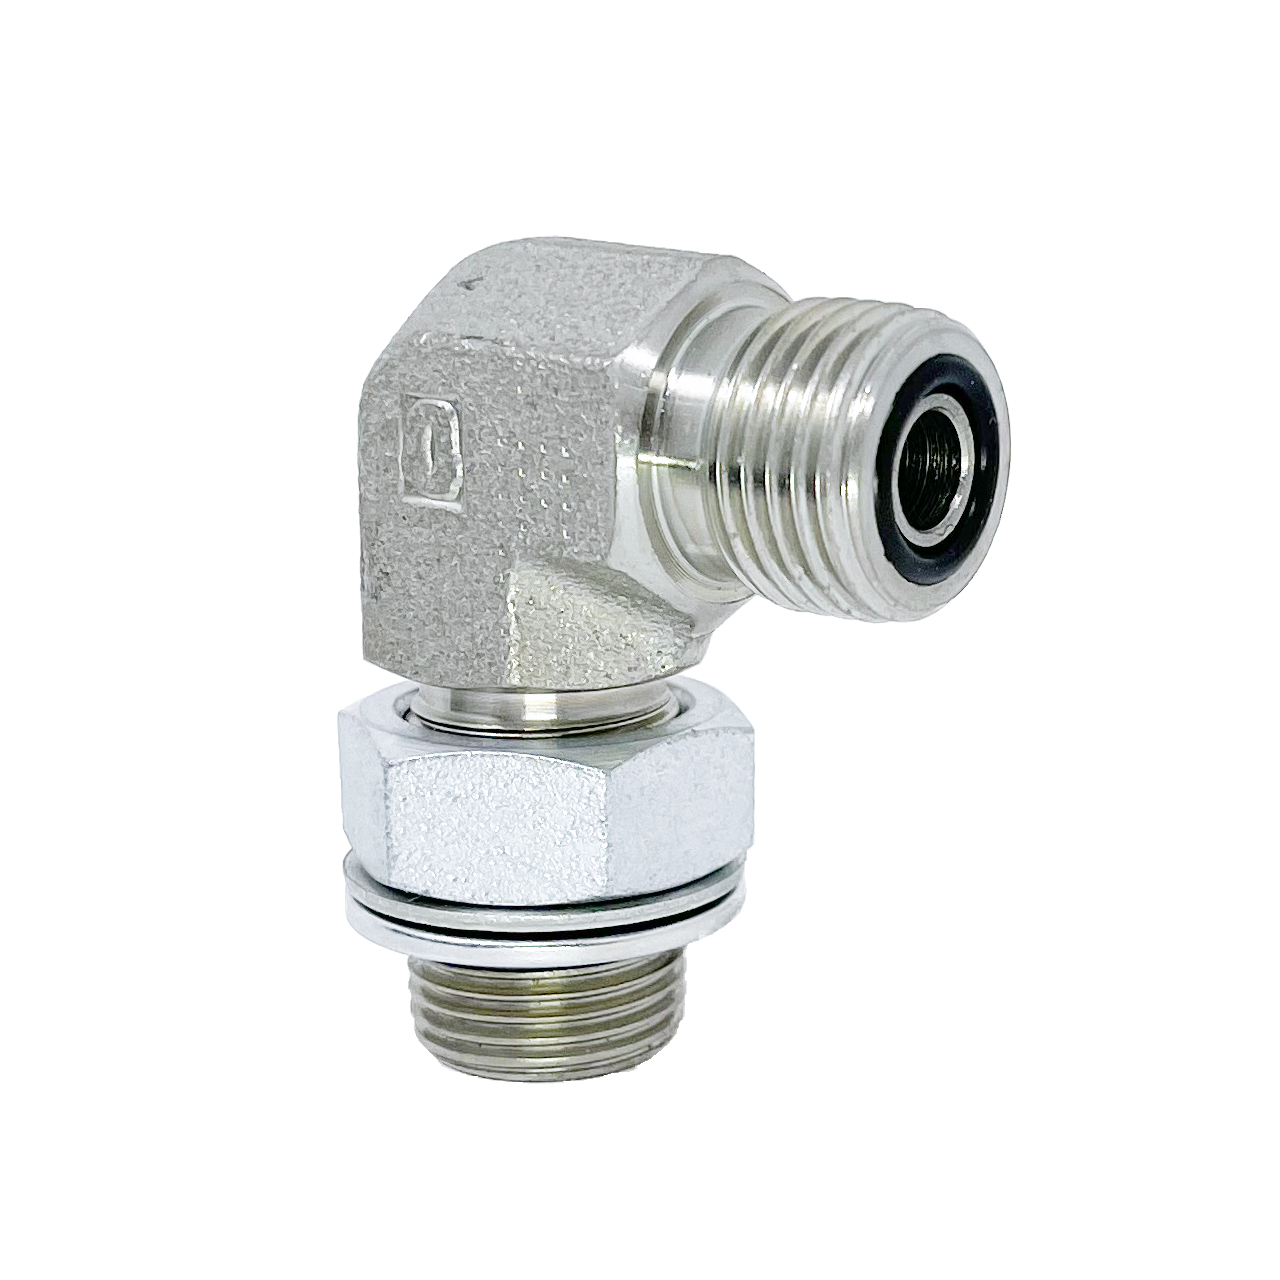 6059-06-08 : Adaptall 90-Degree  Adapter, Male 0.375 (3/8") ORFS x Male 0.5 (1/2") BSPP, Carbon Steel